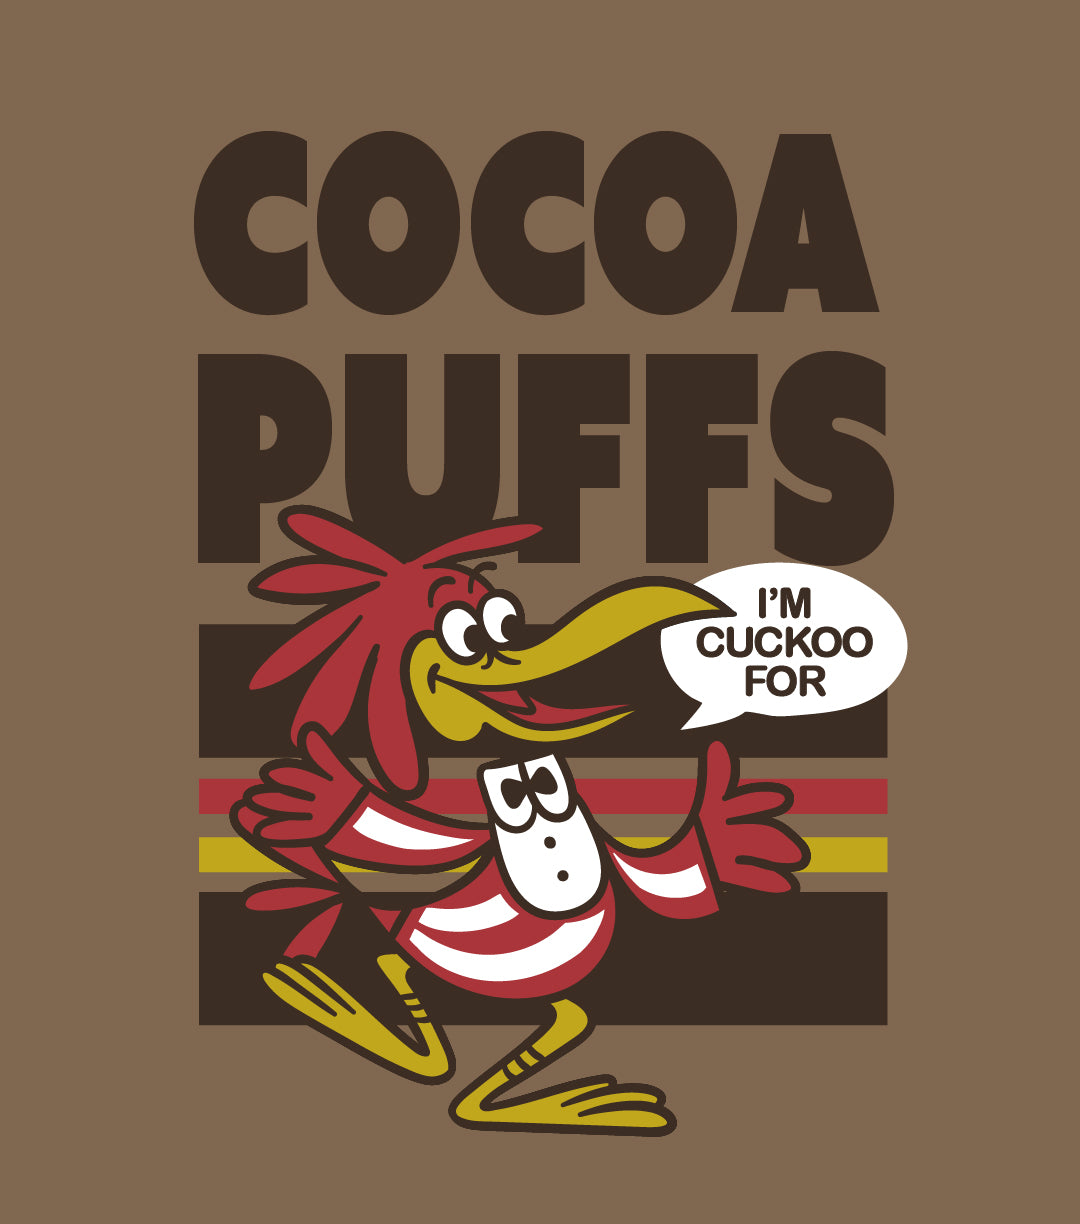 Tee Luv I'm Cuckoo for Cocoa Puffs Cereal Shirt